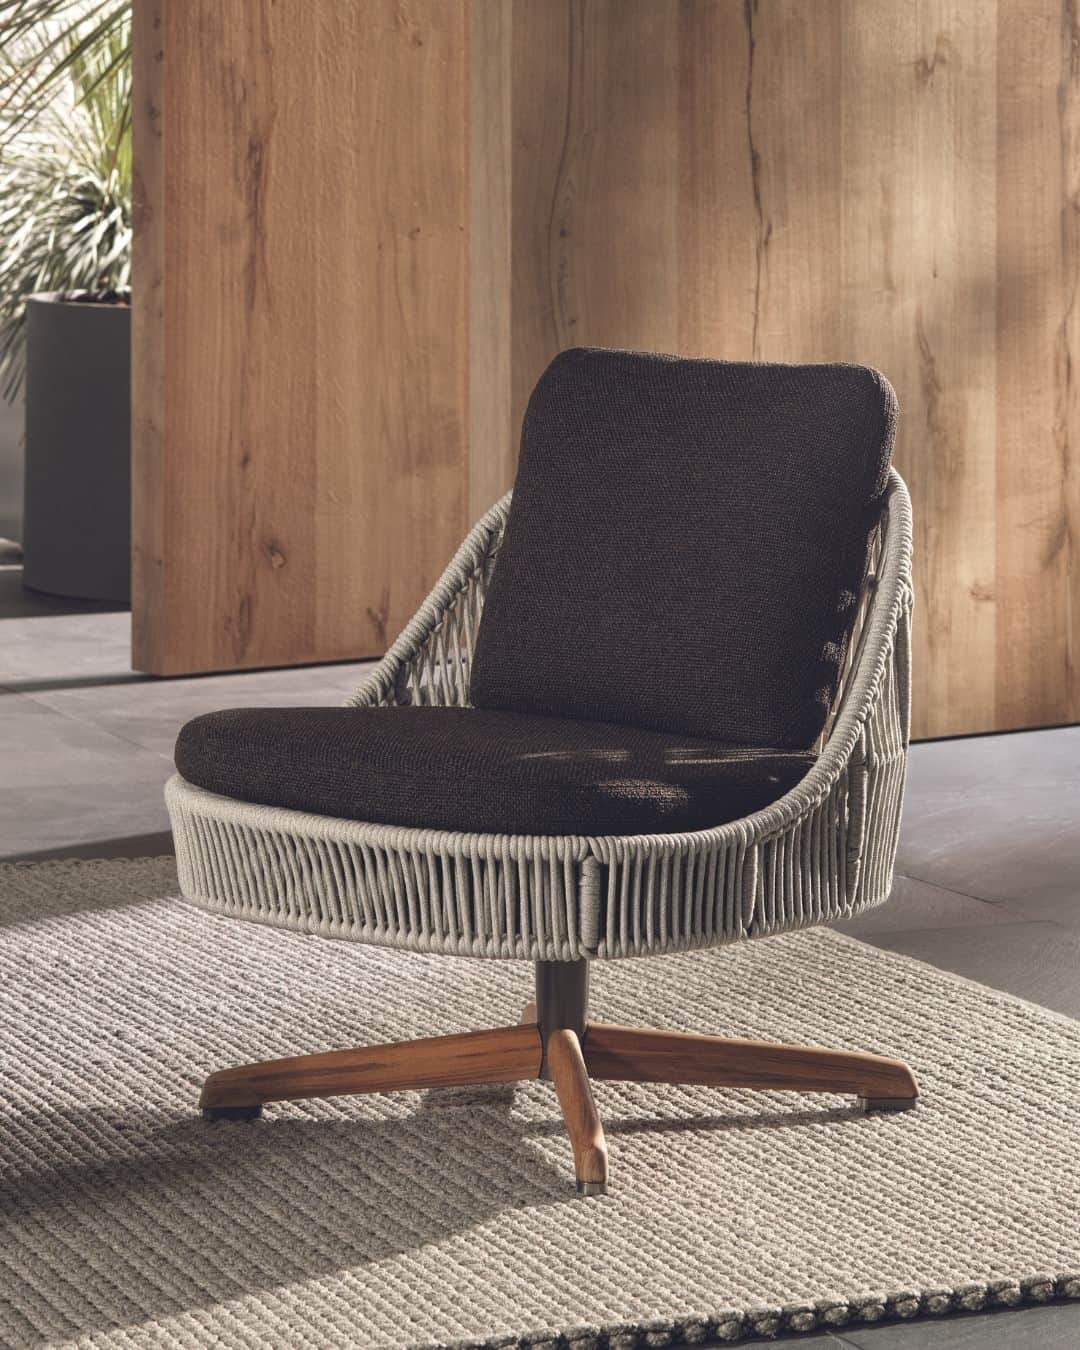 Minotti Londonのインスタグラム：「The elegant, airy lines of the Sendai family of seats, designed by duo @inodasveje, now evolve in their version for open-air spaces.  Sendai Cord Outdoor is the result of an upholstered volume, emptied and stylised through the skilful use of cord in the colours Ecru, Burgundy or Dark Brown: a transparent silhouette that allows the eye to catch a glimpse of the object and that, thanks to its light aesthetic, creates a harmonious contrast when combined with bulkier seating systems.  The 360° swivel base with return, a mechanism thoroughly tested for outdoor use, reflects the same stylistic principle as the indoor version, but in a natural teak finish.  Tap the link in our bio to discover the Sendai Cord Outdoor.  #sendai #minotti #minottilondon #inodasveje #interiordesign #design #madeinitaly #italianstyle #italianfurniture #luxuryfurniture #outdoorfurniture」